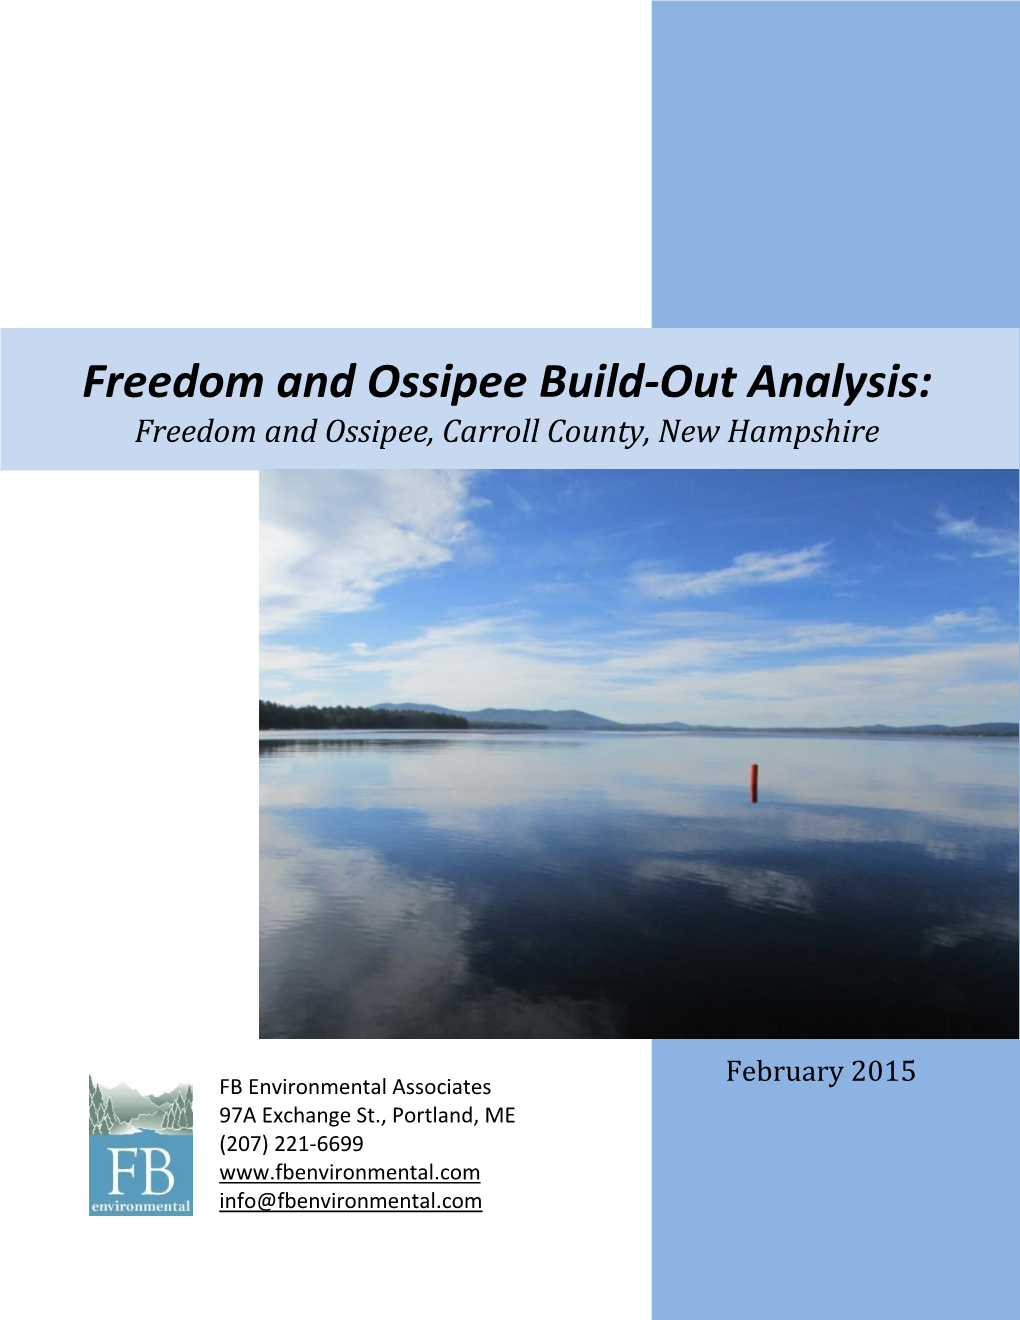 To Download the Freedom-Ossipee Build-Out Report